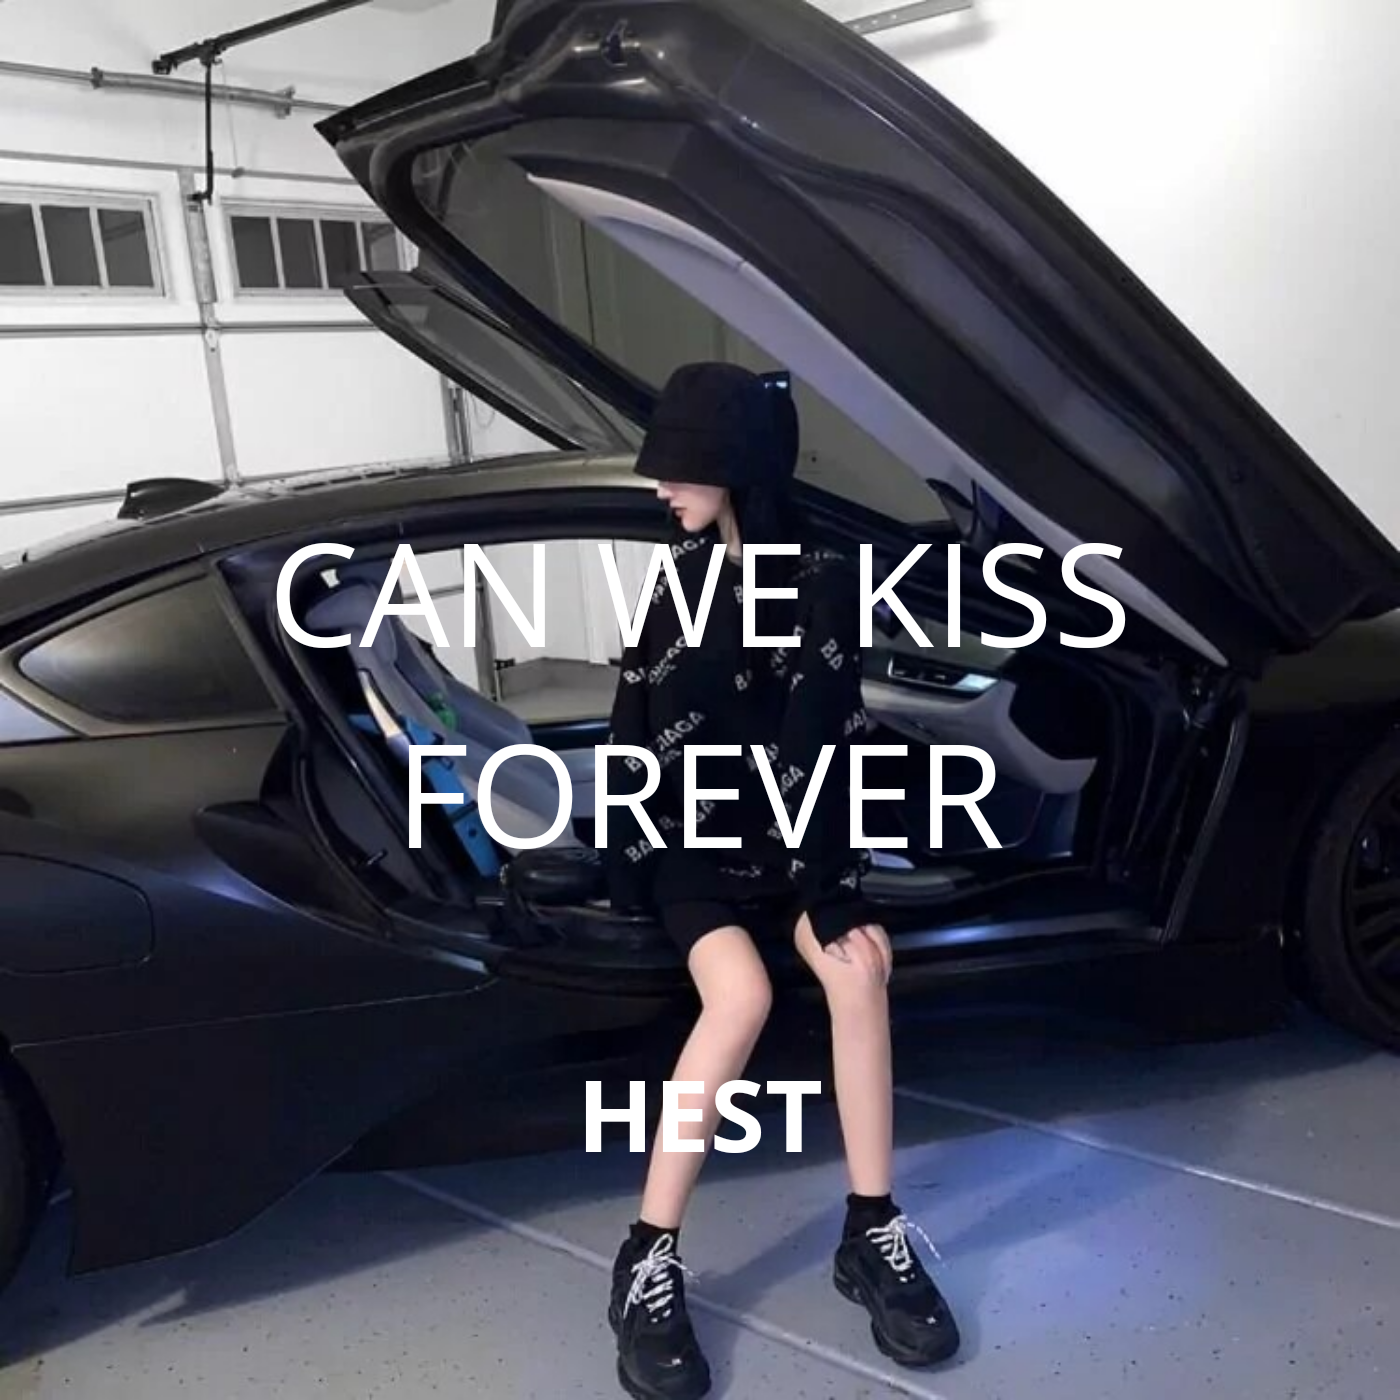 Kina-Can We Kiss Forever（HEST remix）歌词 歌手HEST-专辑Can We Kiss Forever-单曲《Kina-Can We Kiss Forever（HEST remix）》LRC歌词下载